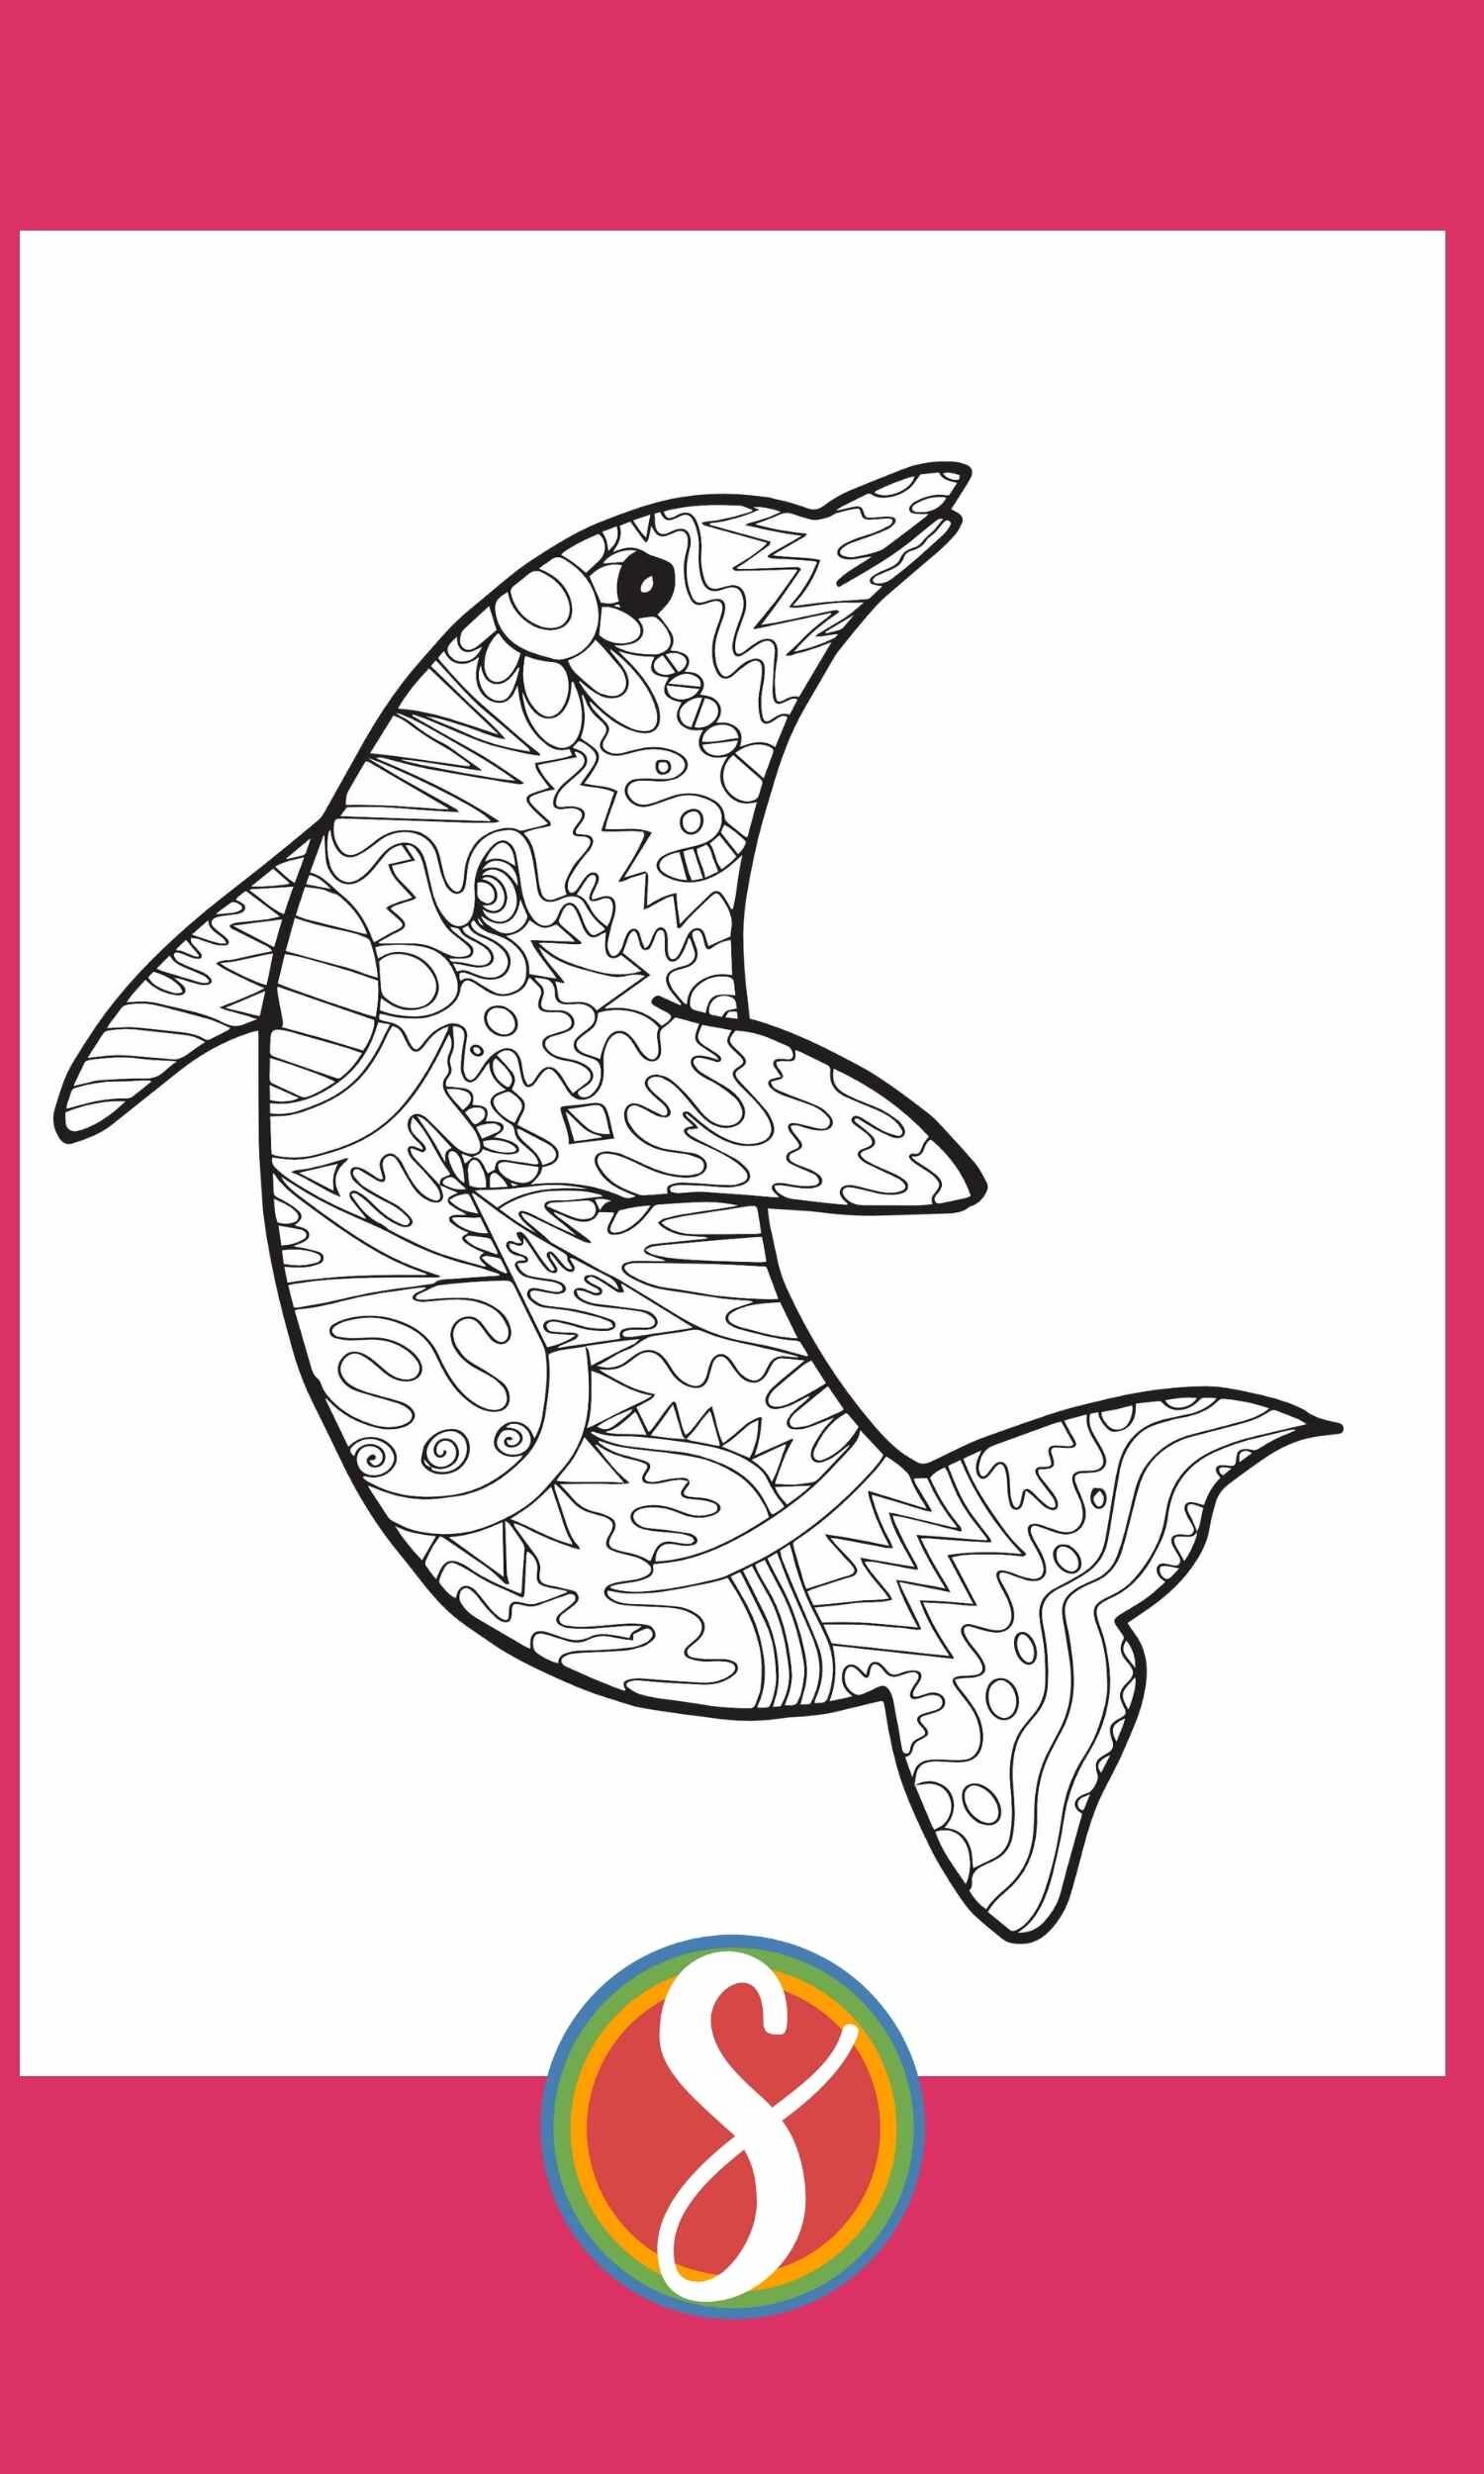 Free zentangle adult coloring page about Dolphin + more free dolphin coloring pages at Stevie Doodles